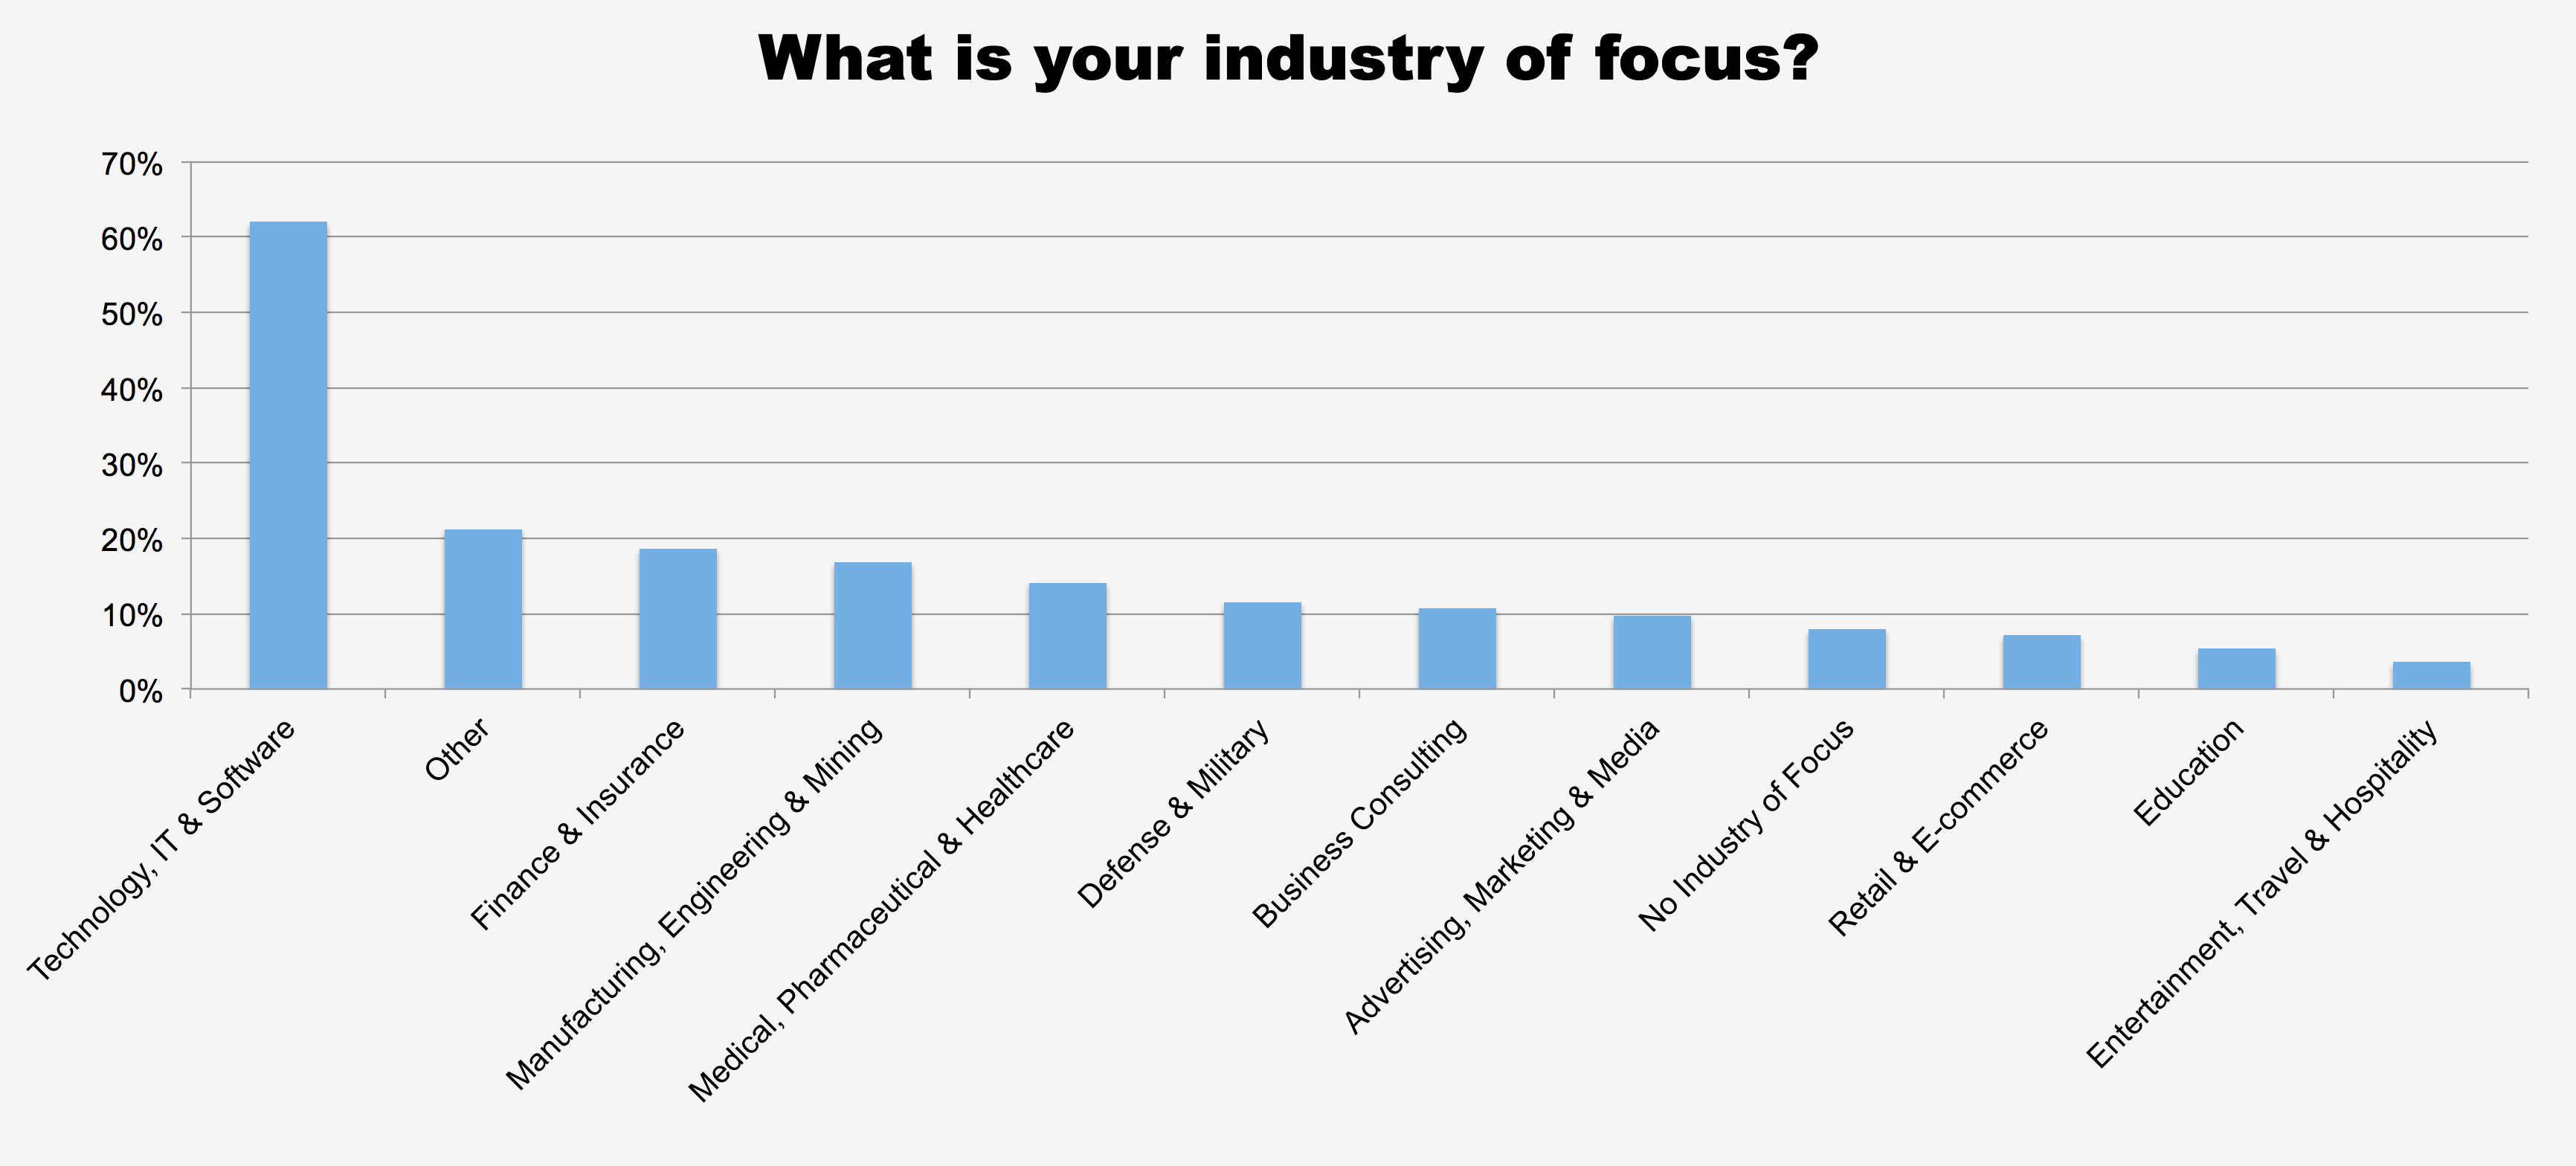 What is your industry of focus?